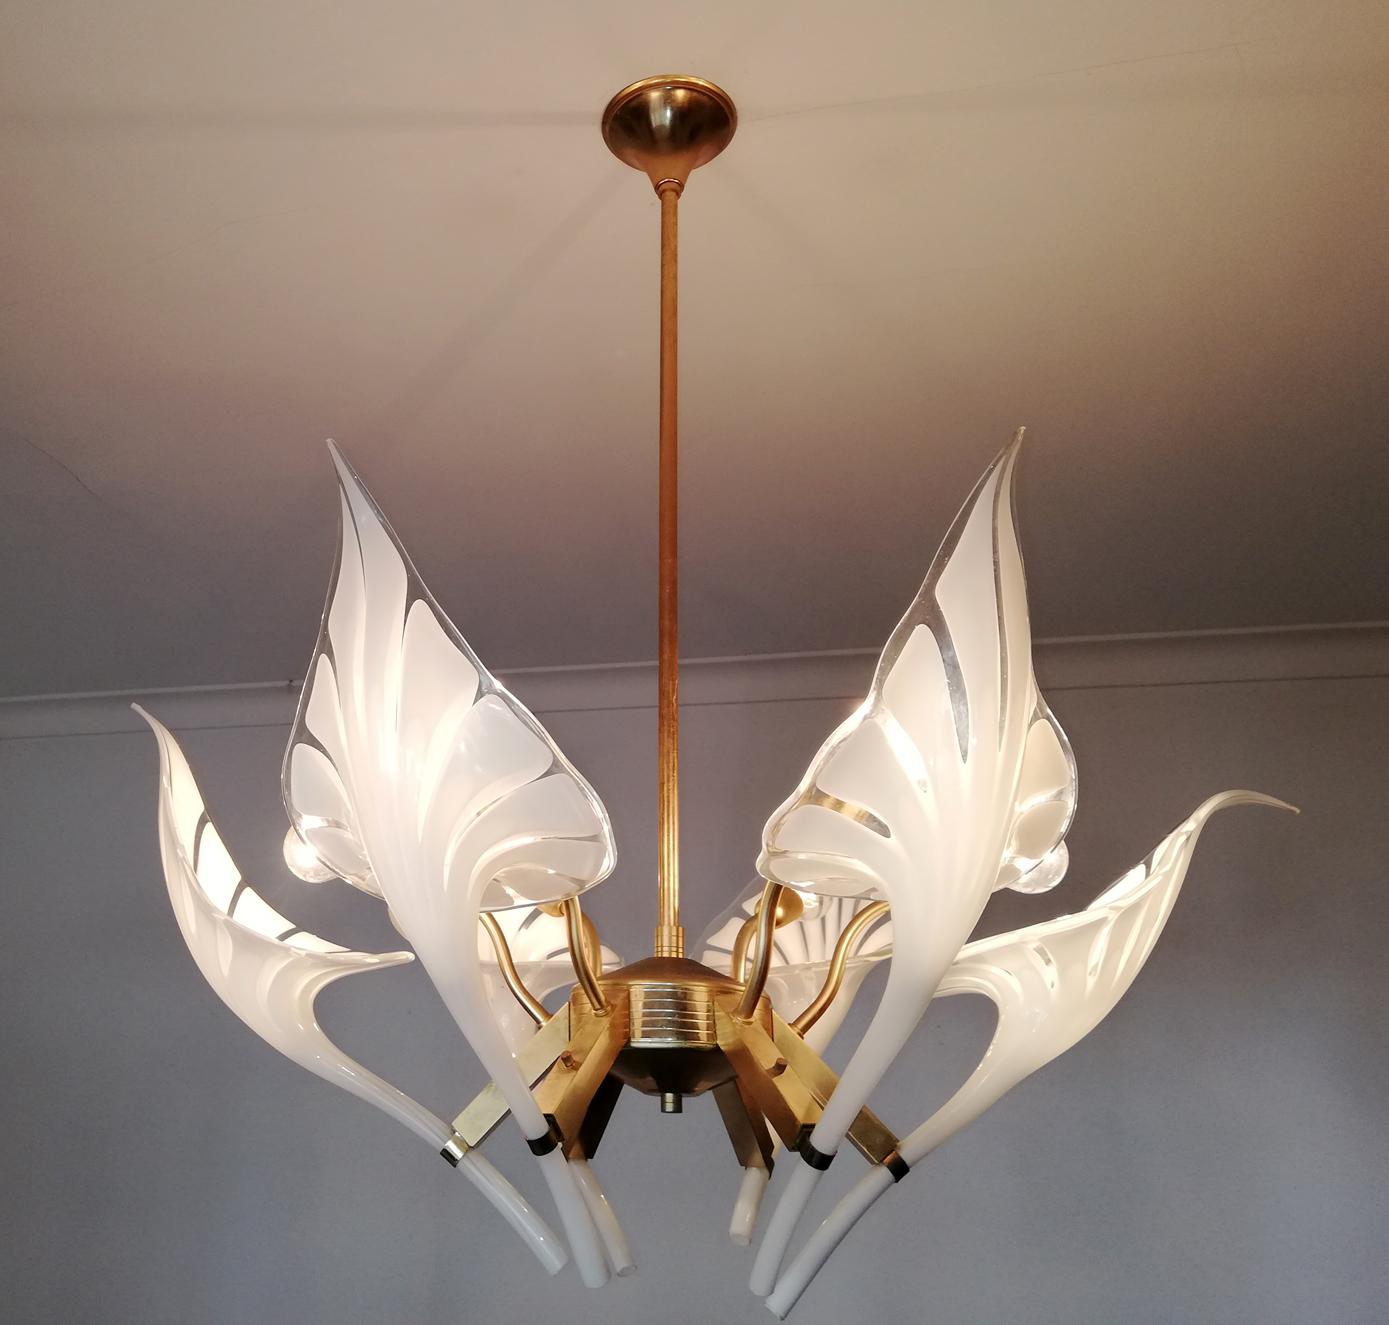 Awesome pair of 1970s vintage Italian Murano Lily Calla art glass shades gilt chandelier. Franco Luce Seguso chandelier with six hand blown Murano glass leaves, white and clear glass and gold-plated brass.
Measures:
Diameter 30 in/ 76 cm
Height 35.4